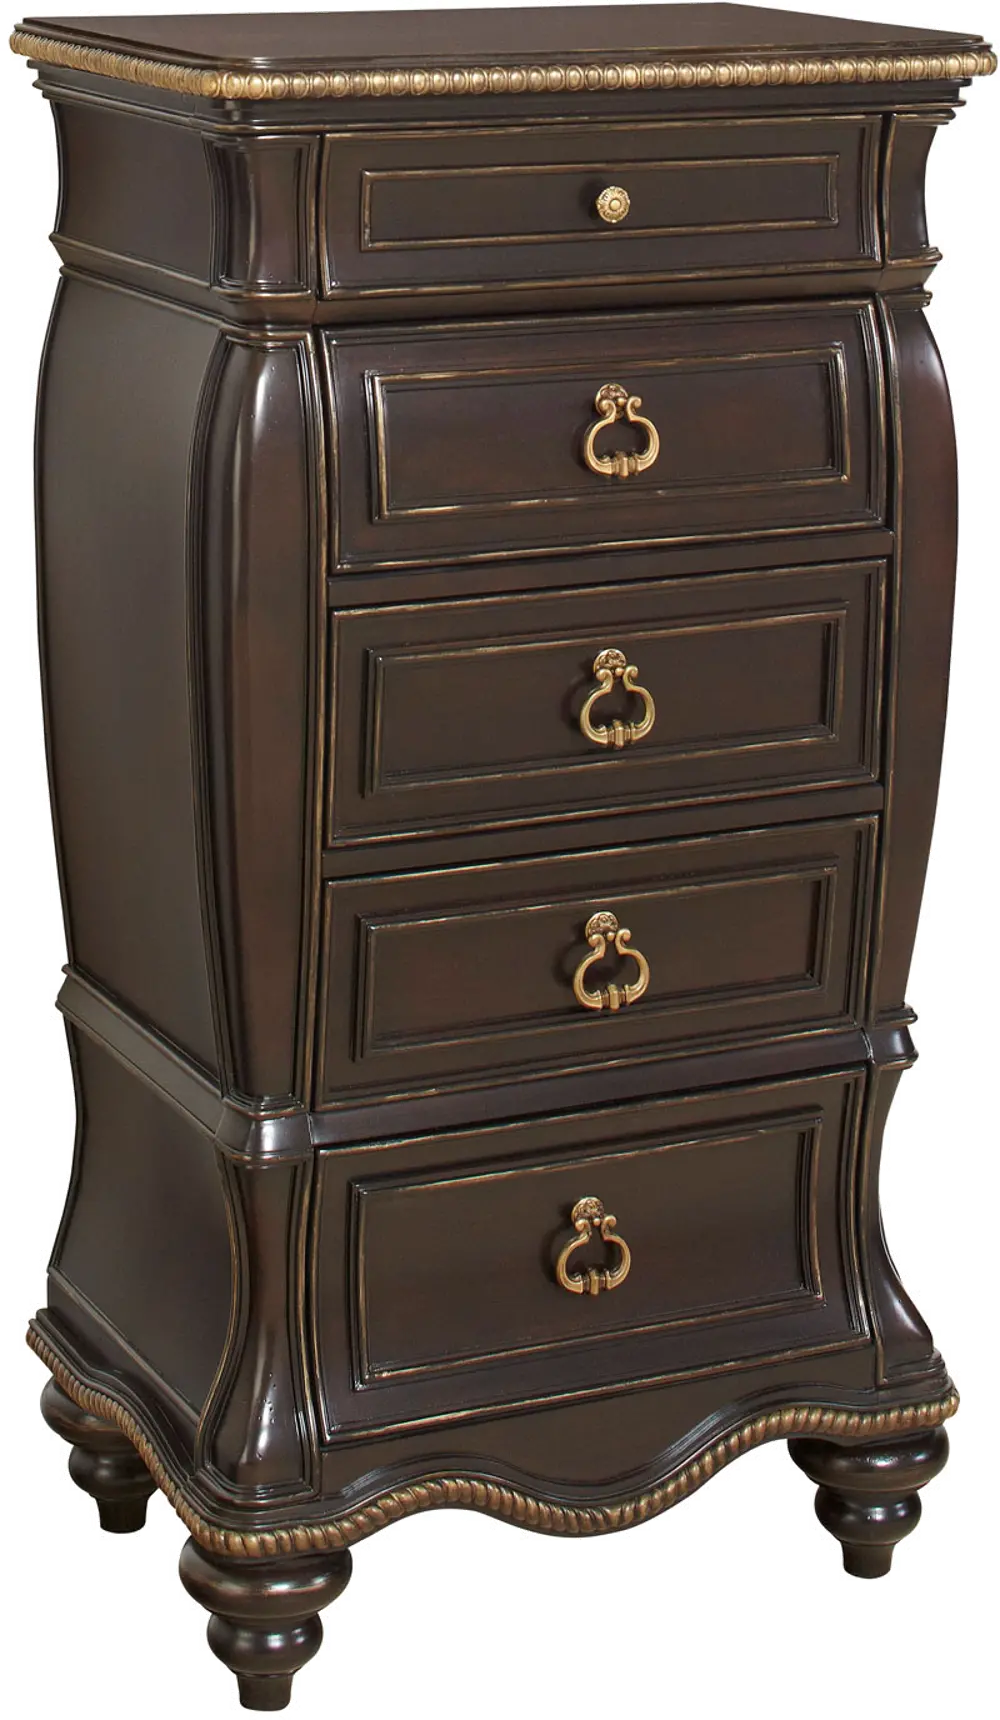 Black Cherry Traditional Lingerie Chest of Drawers - Palisades-1